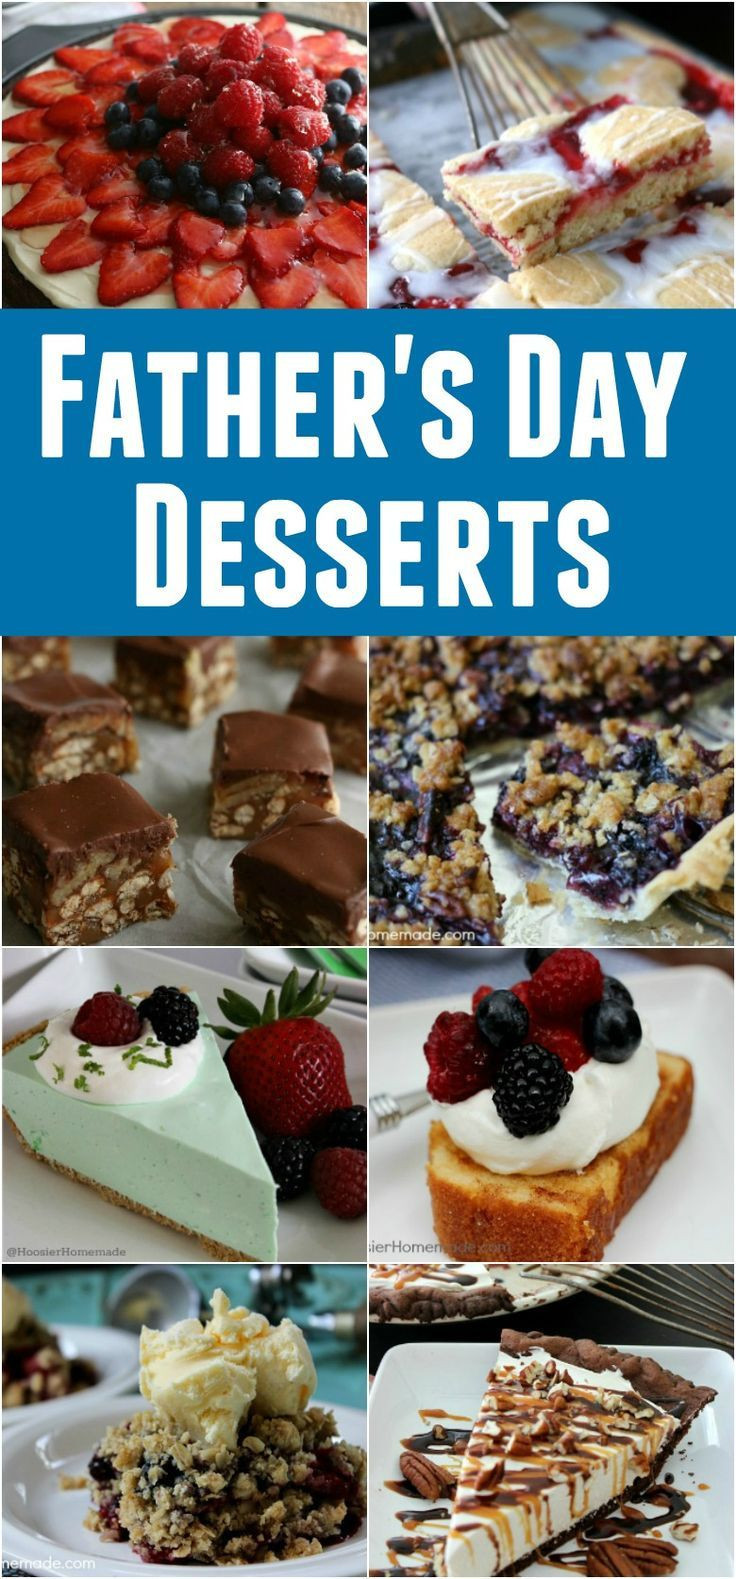 Mother'S Day Dessert Ideas
 The 20 Best Ideas for Desserts for Mother s Day Best